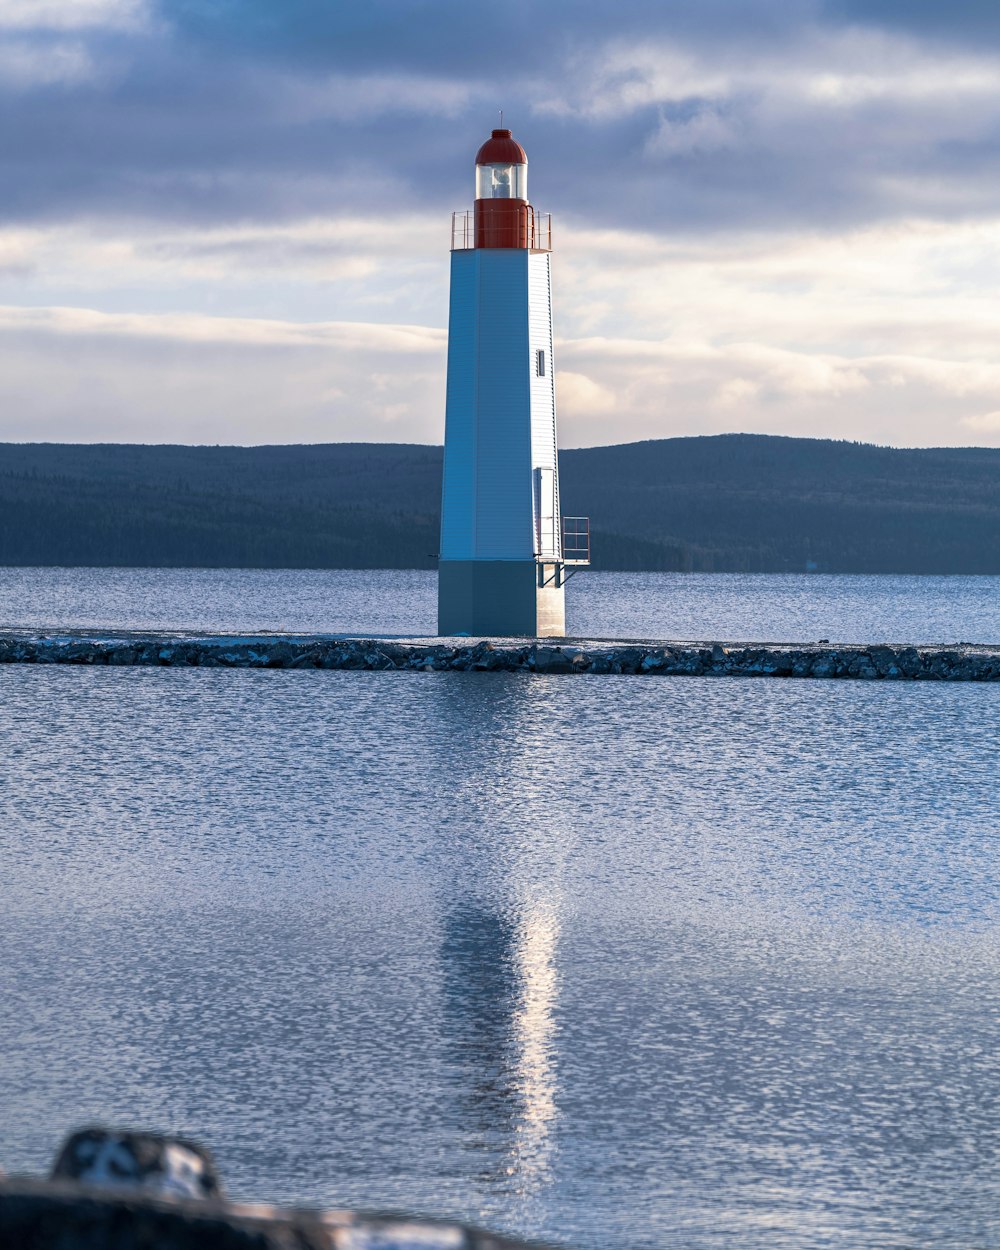 white and red lighthouse on body of water under cloudy sky during daytime